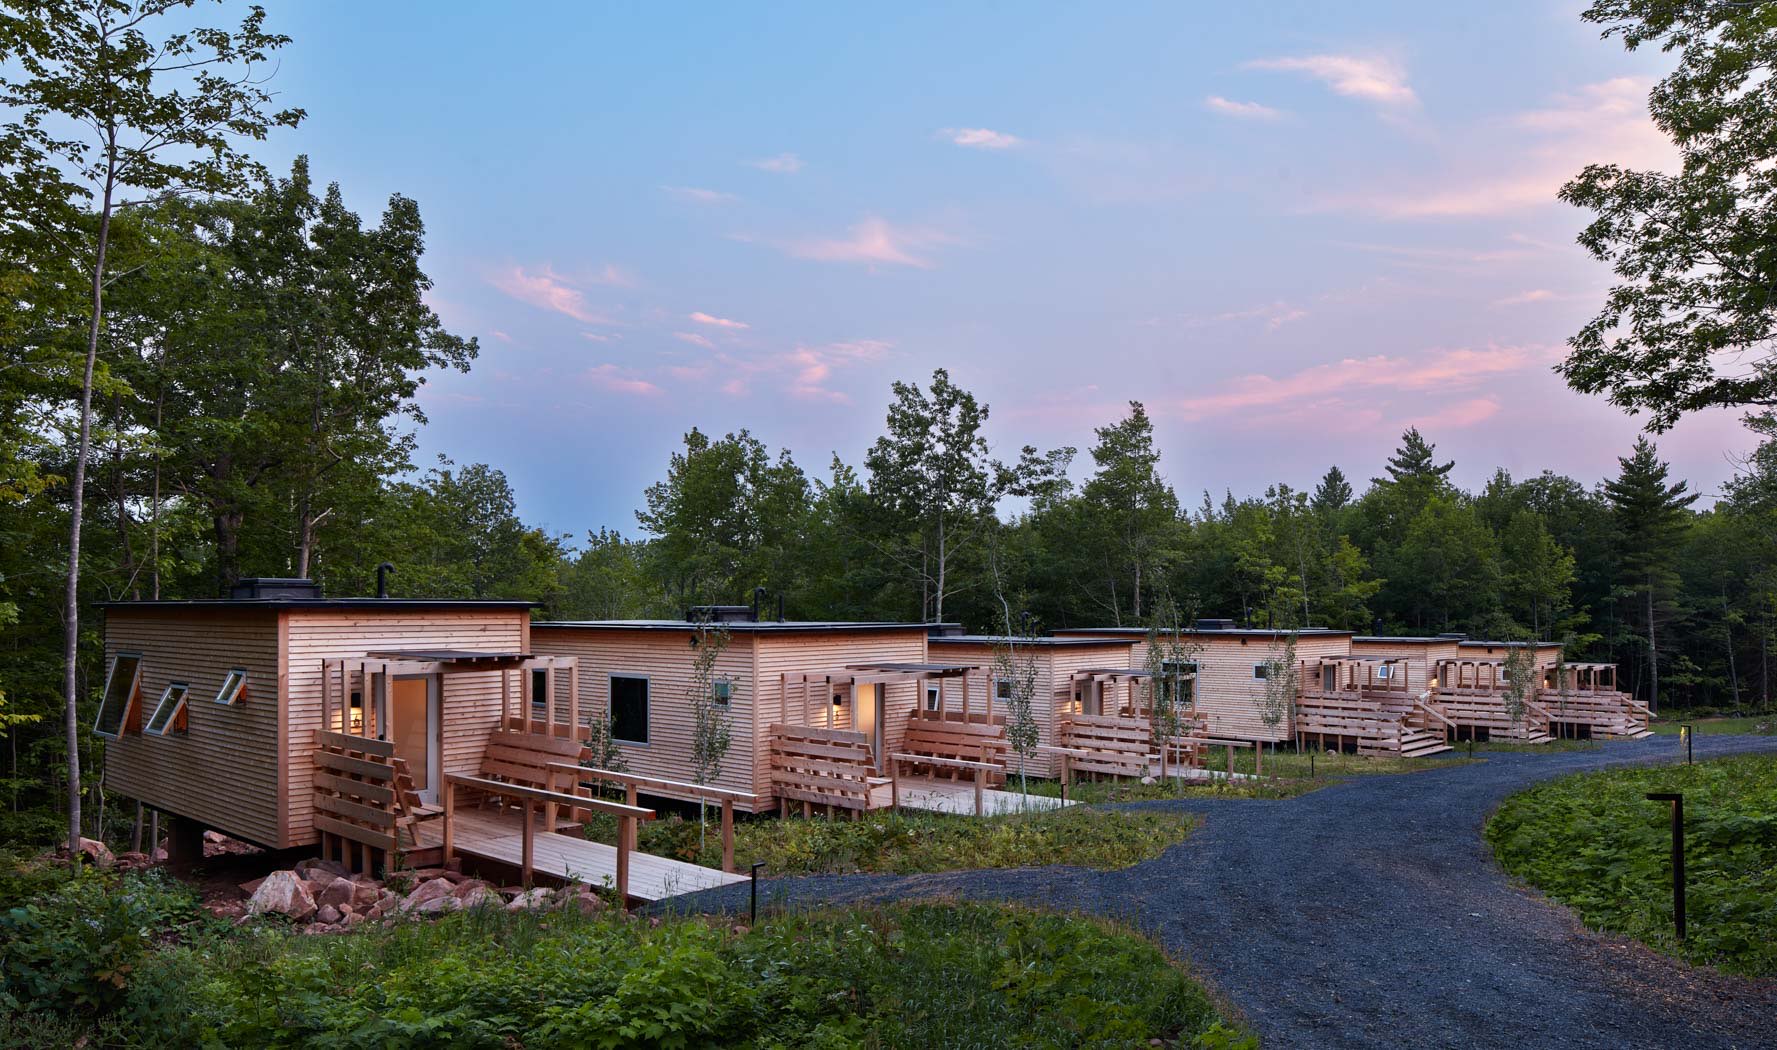 General view of some cabins surrounded by nature on a sunset